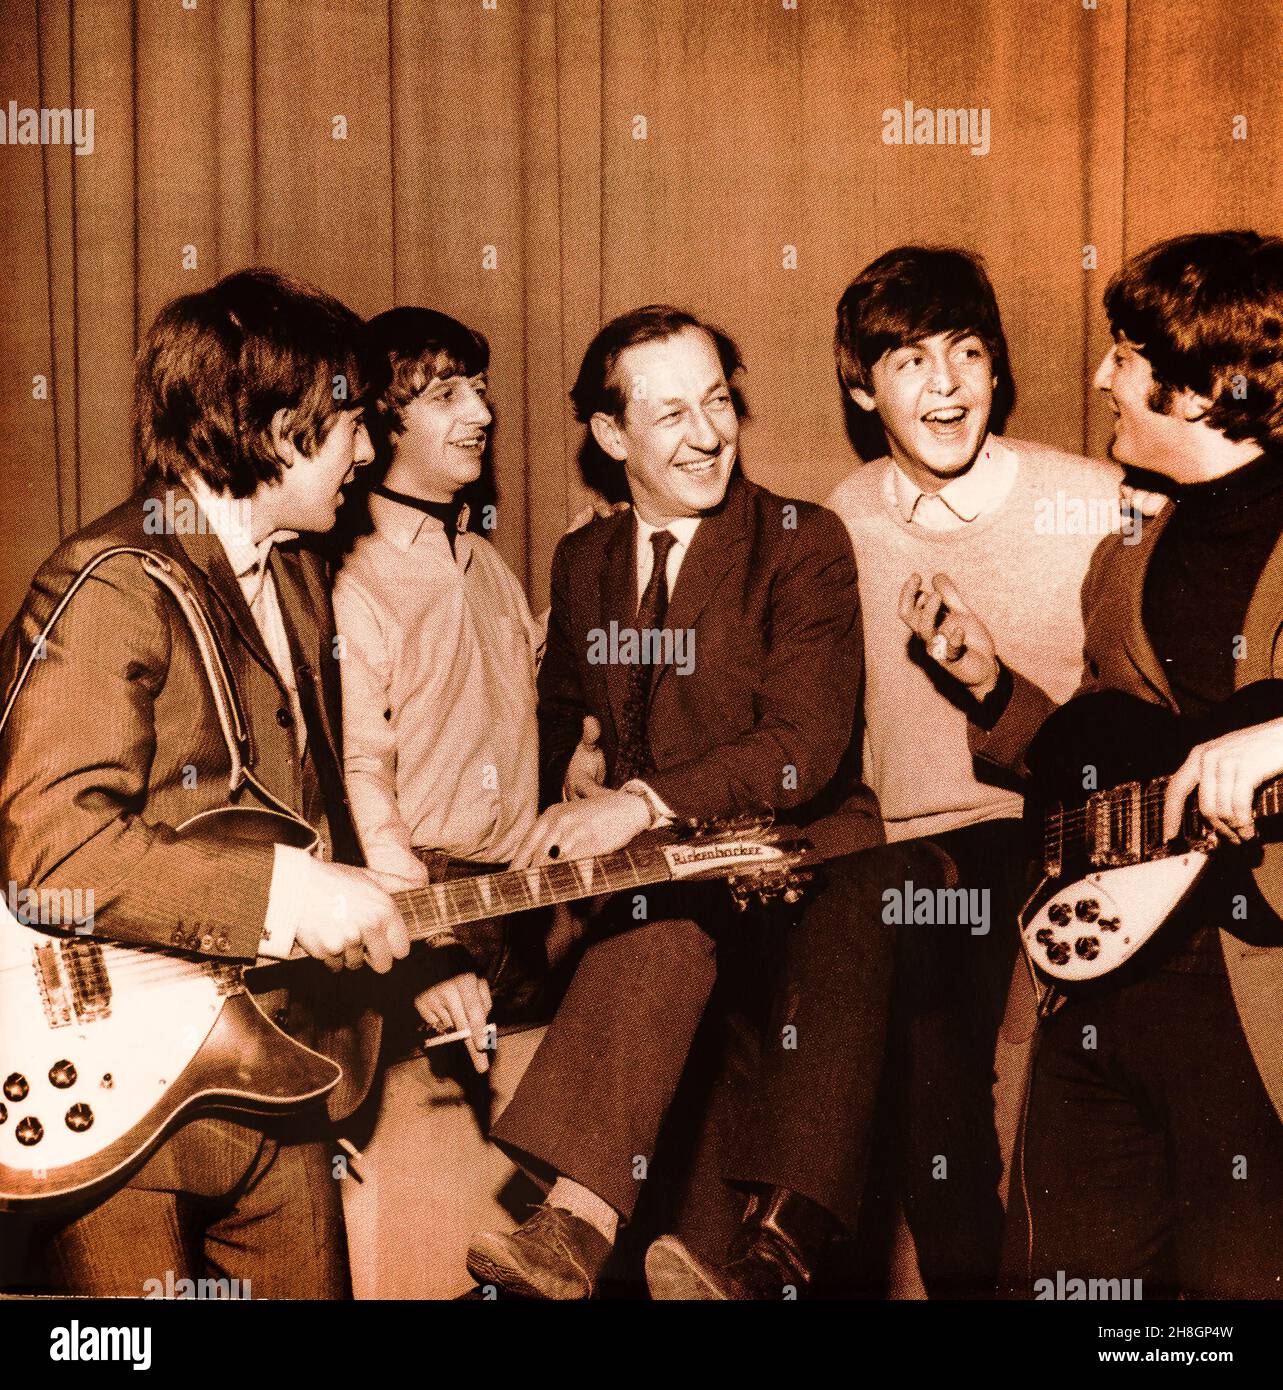 EMI CD  Inlay - The Beatles -Live at the BBC. Stock Photo